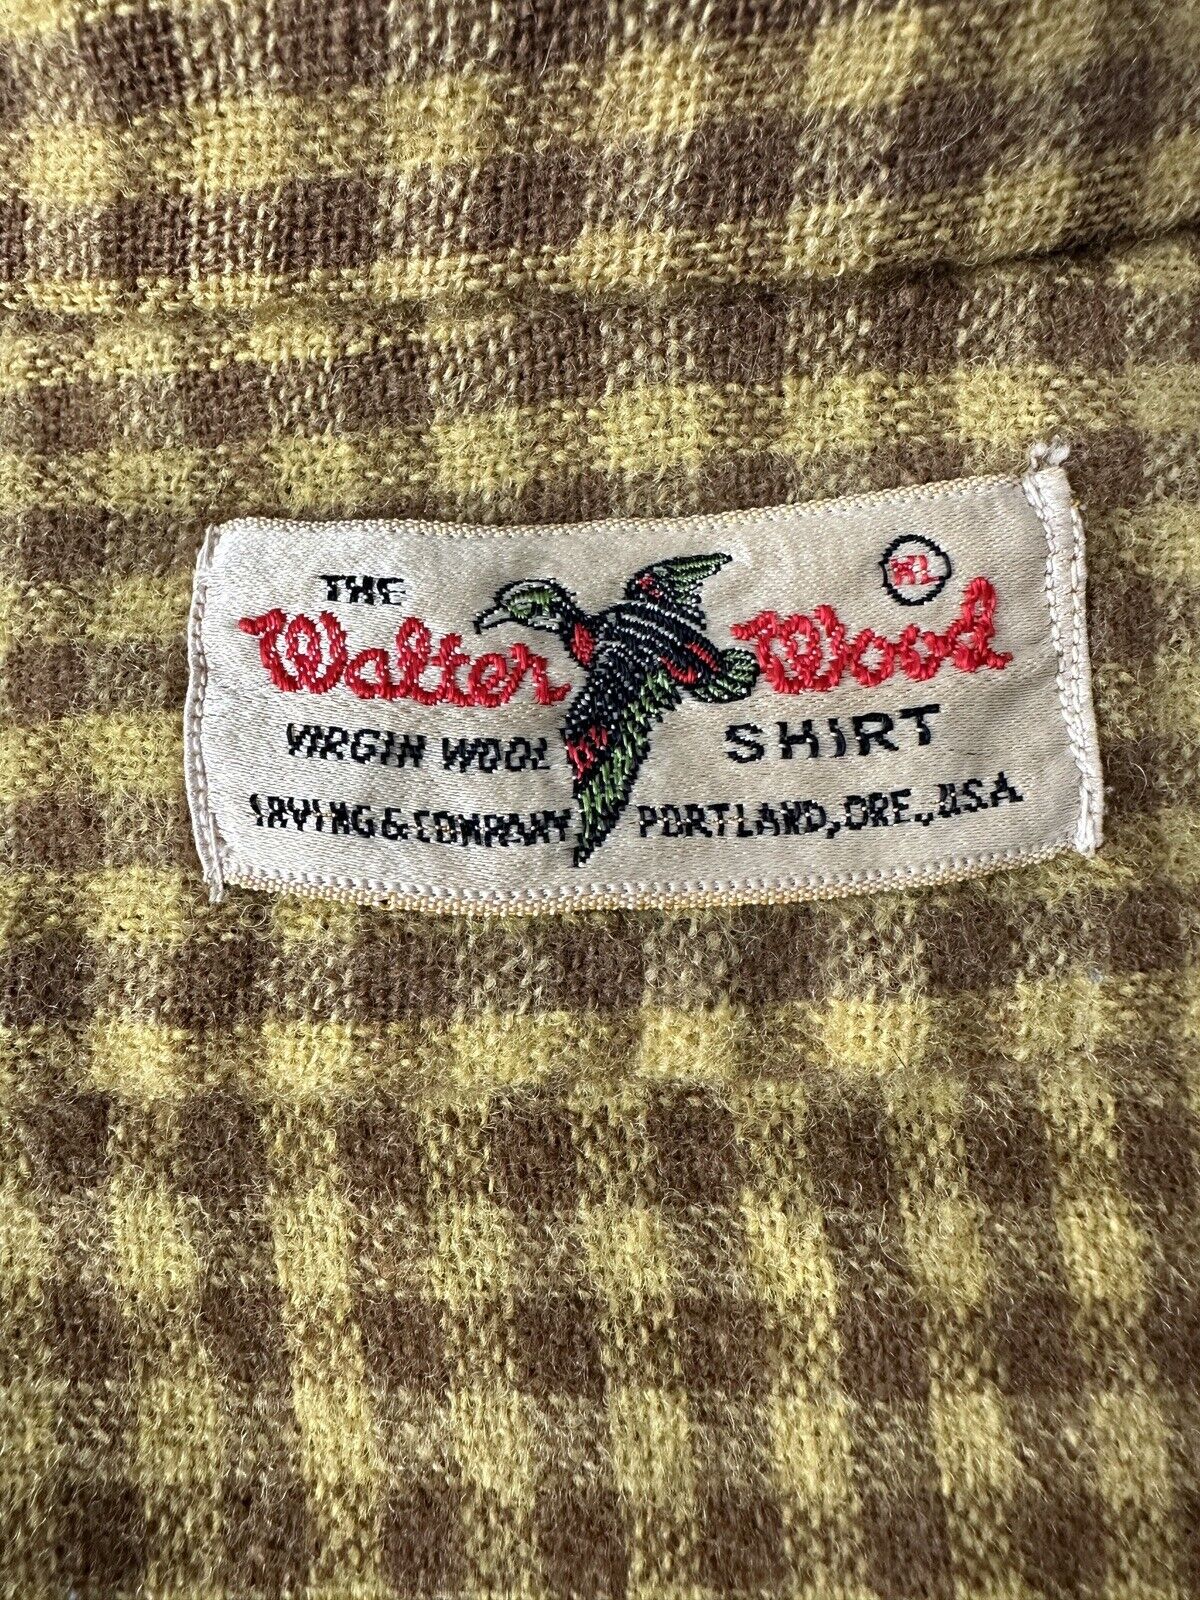 vintage walter wood irving company wool shirt 40s 50s chest 46” Plaid